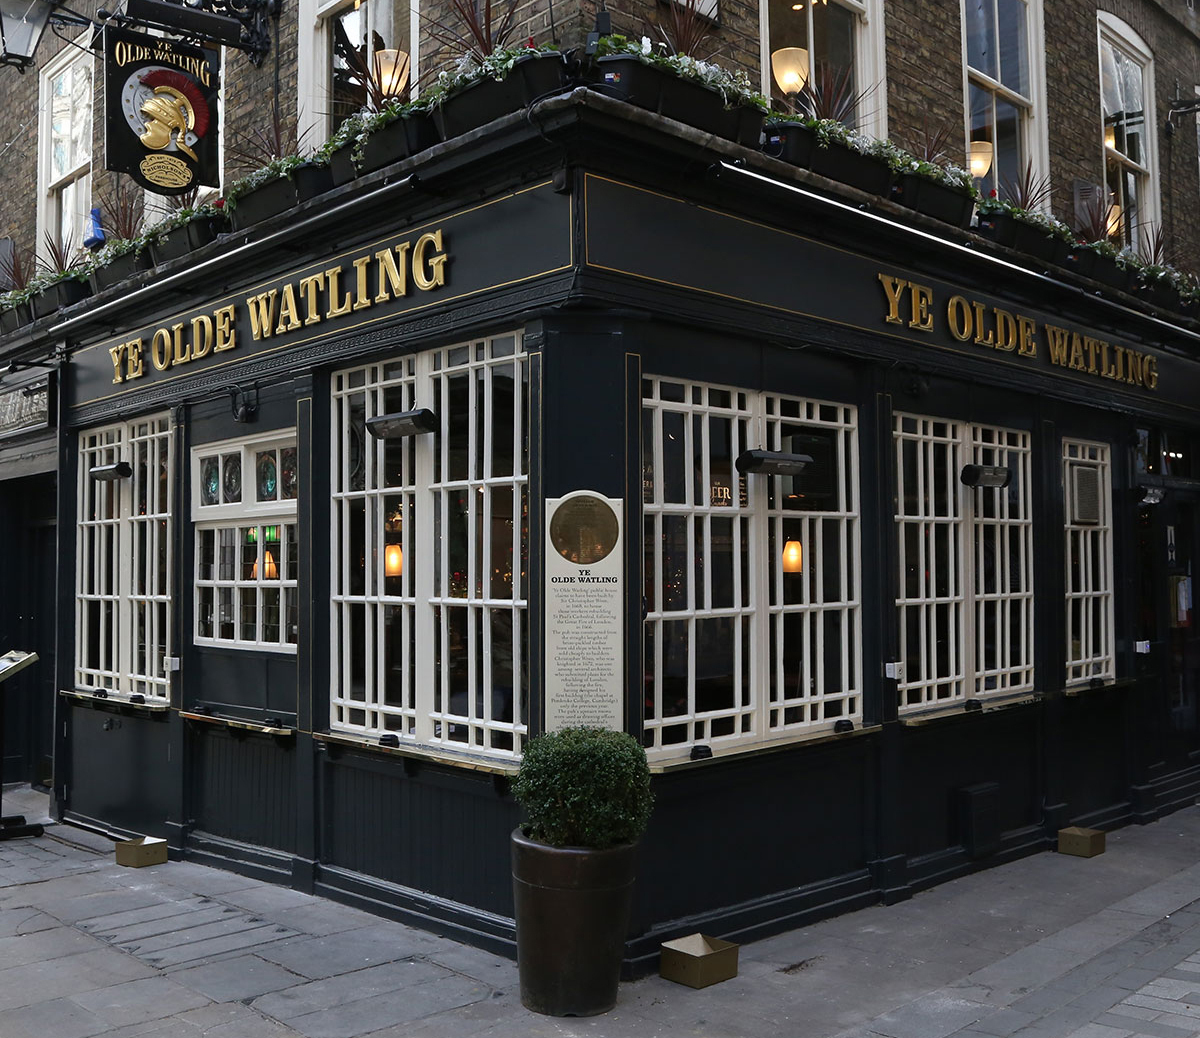 9 Best Pubs in the City of London - Ye Olde Watling pub exterior on the corner of the street, its a dark black building with gold writing and white window frames.